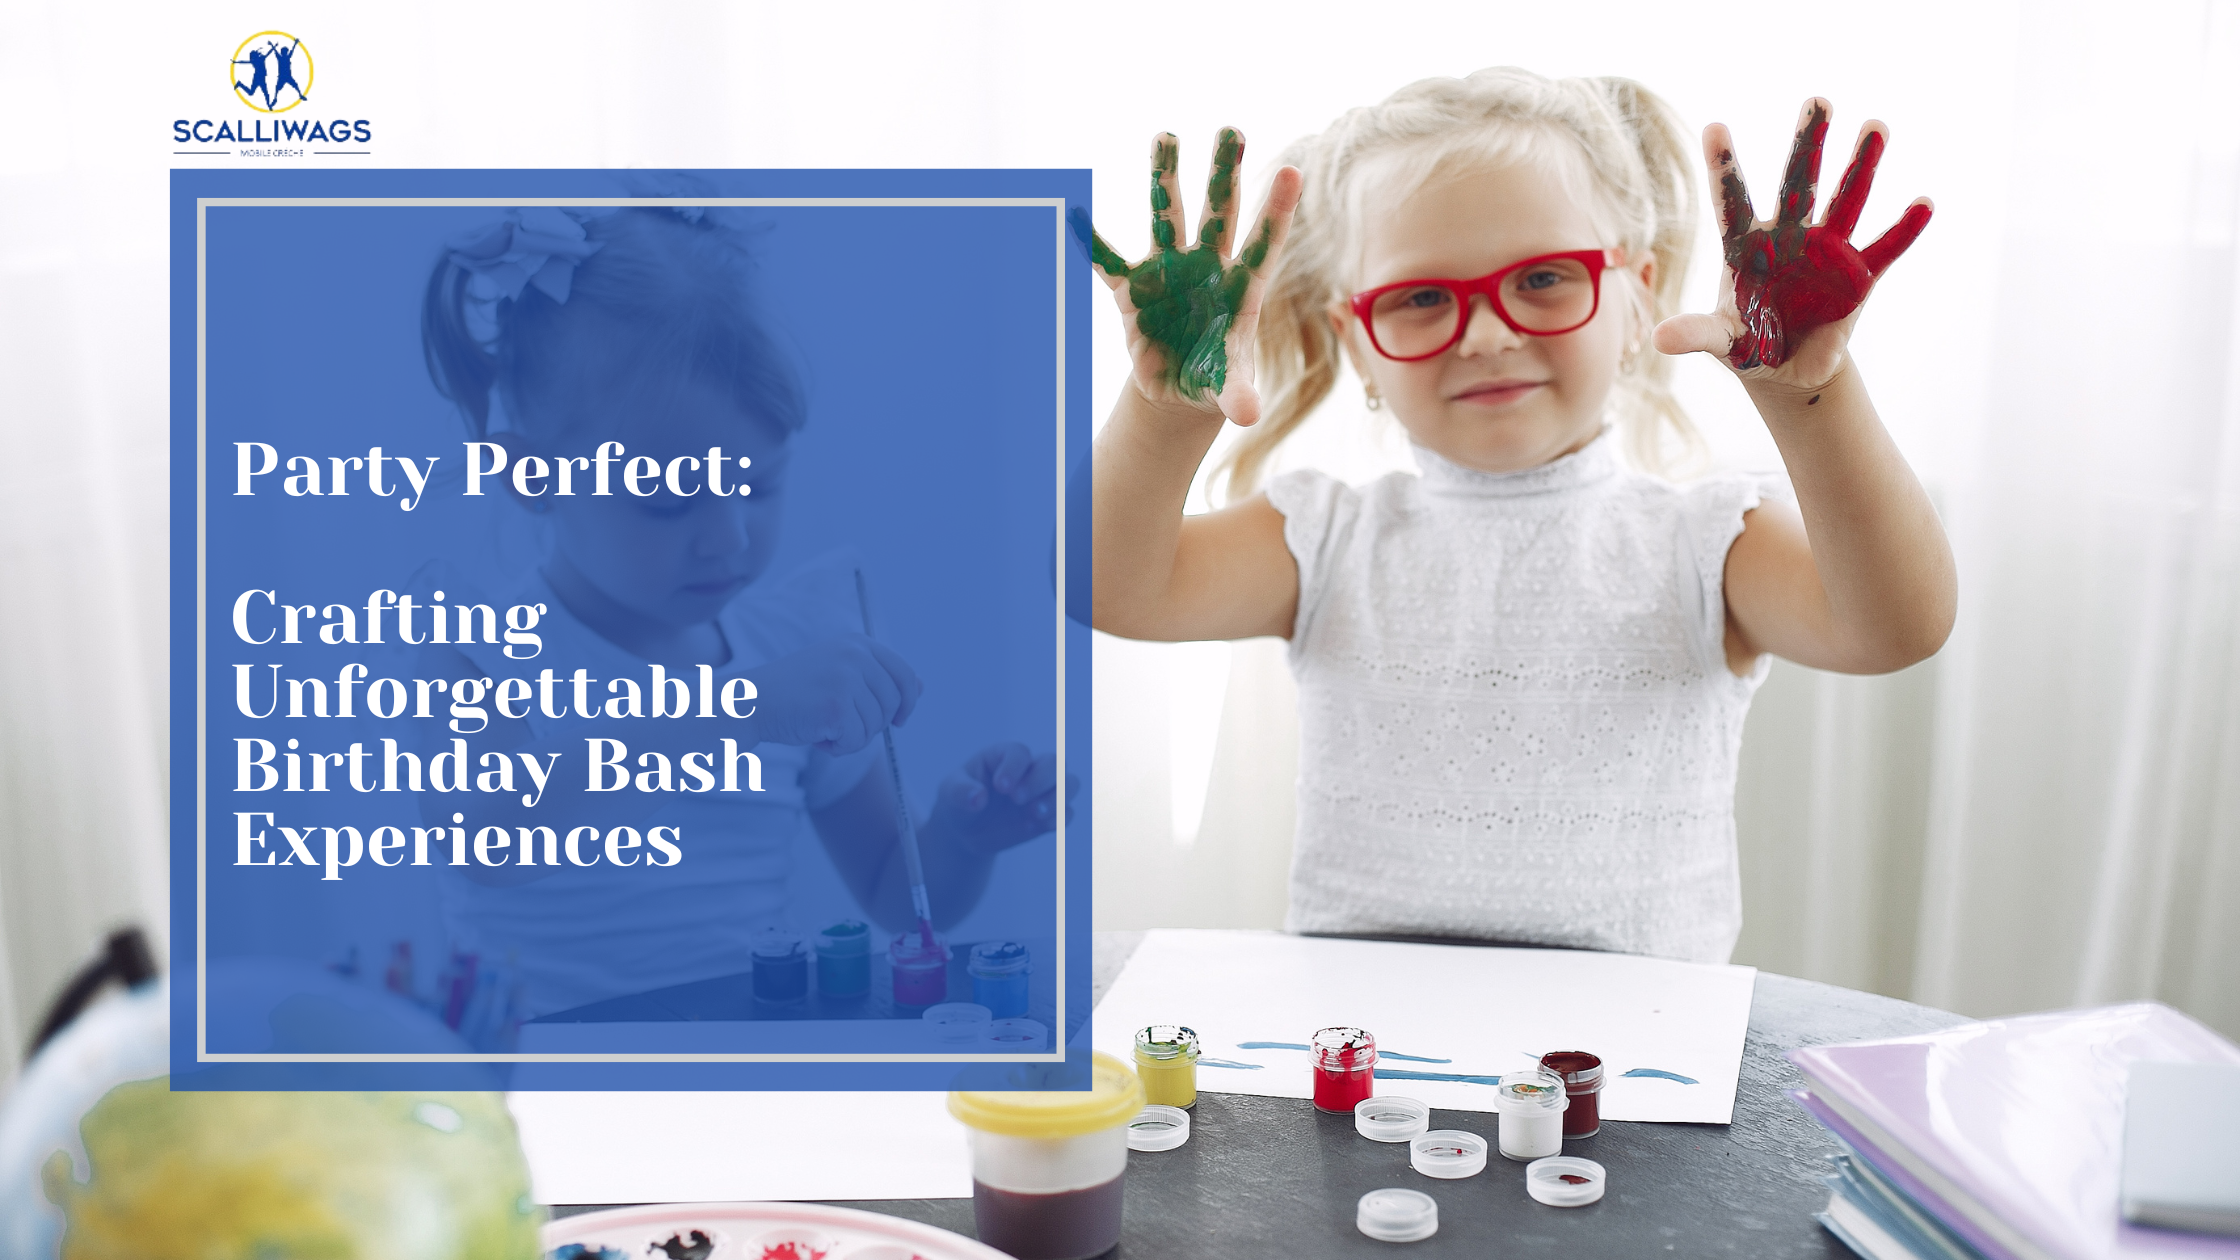 Party Perfect: Crafting Unforgettable Birthday Bash Experiences